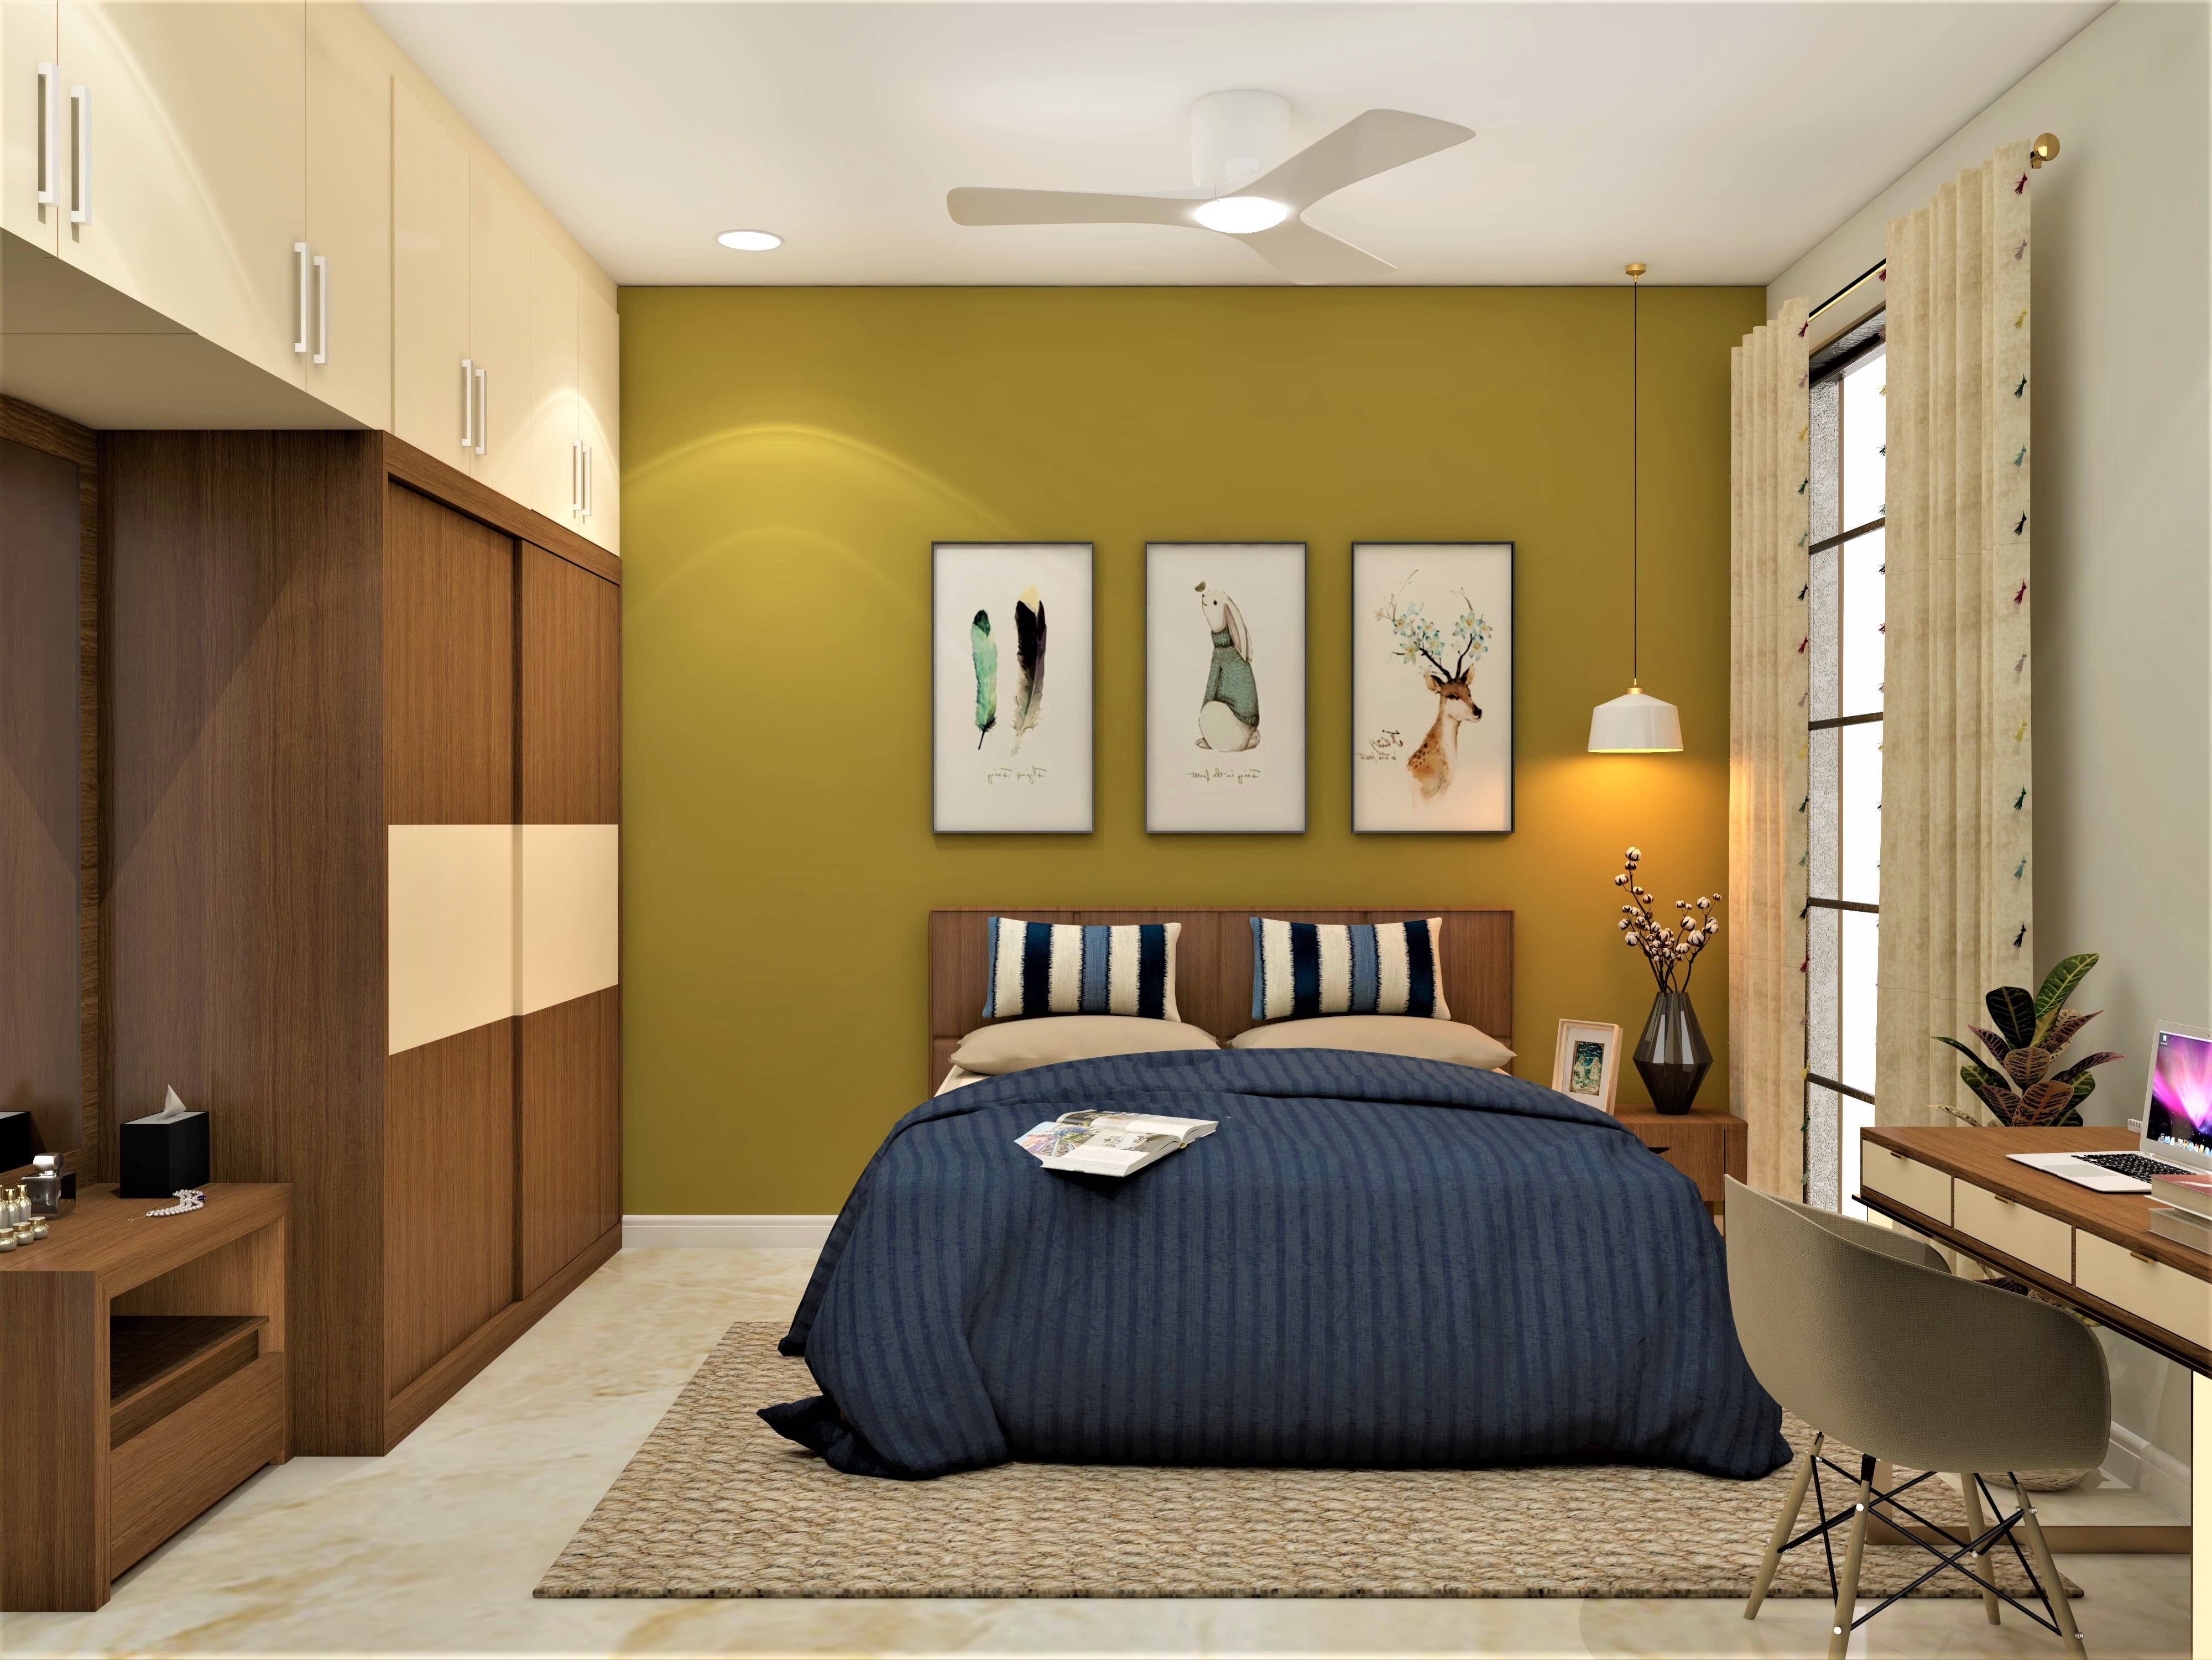 Modern guest room design with a sliding wardrobe - Beautiful Homes